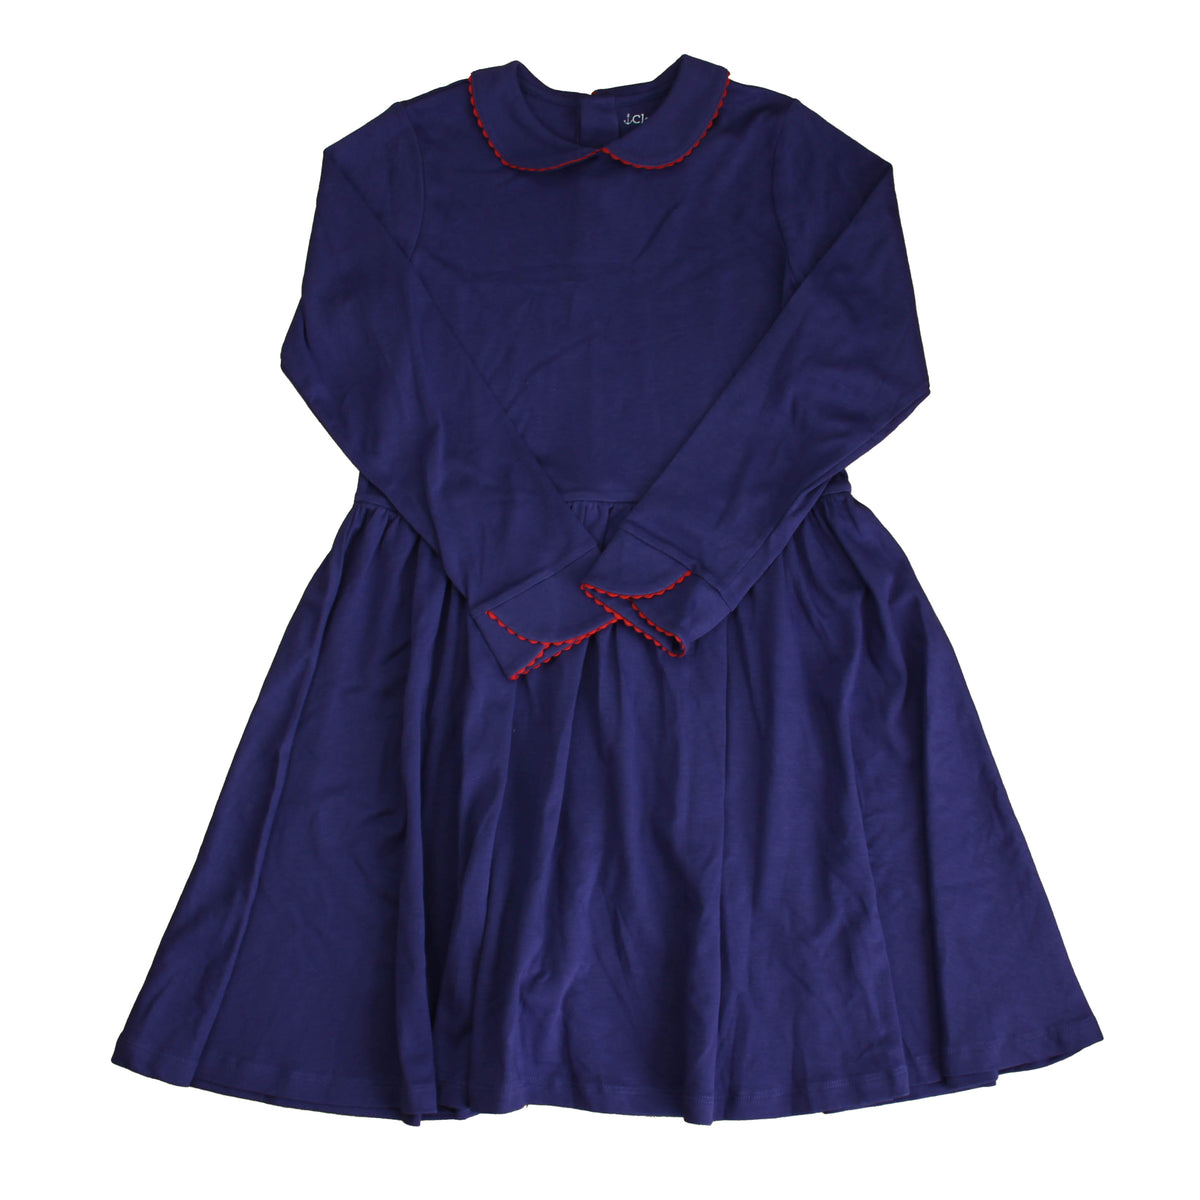 New with Tags: Blue Ribbon Dress size: 6-14 Years -- FINAL SALE